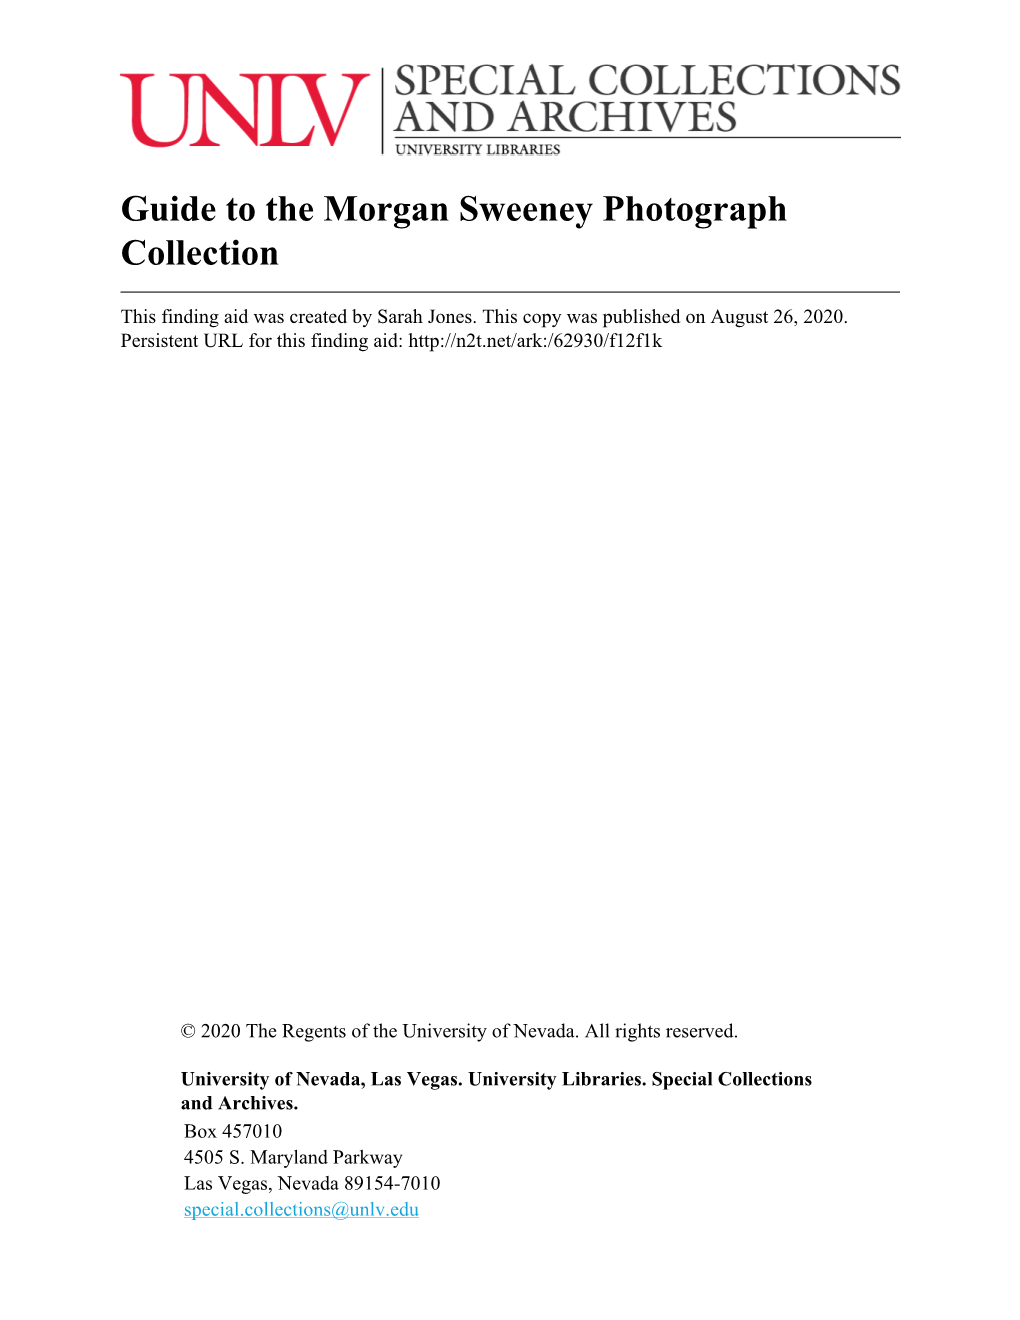 Guide to the Morgan Sweeney Photograph Collection